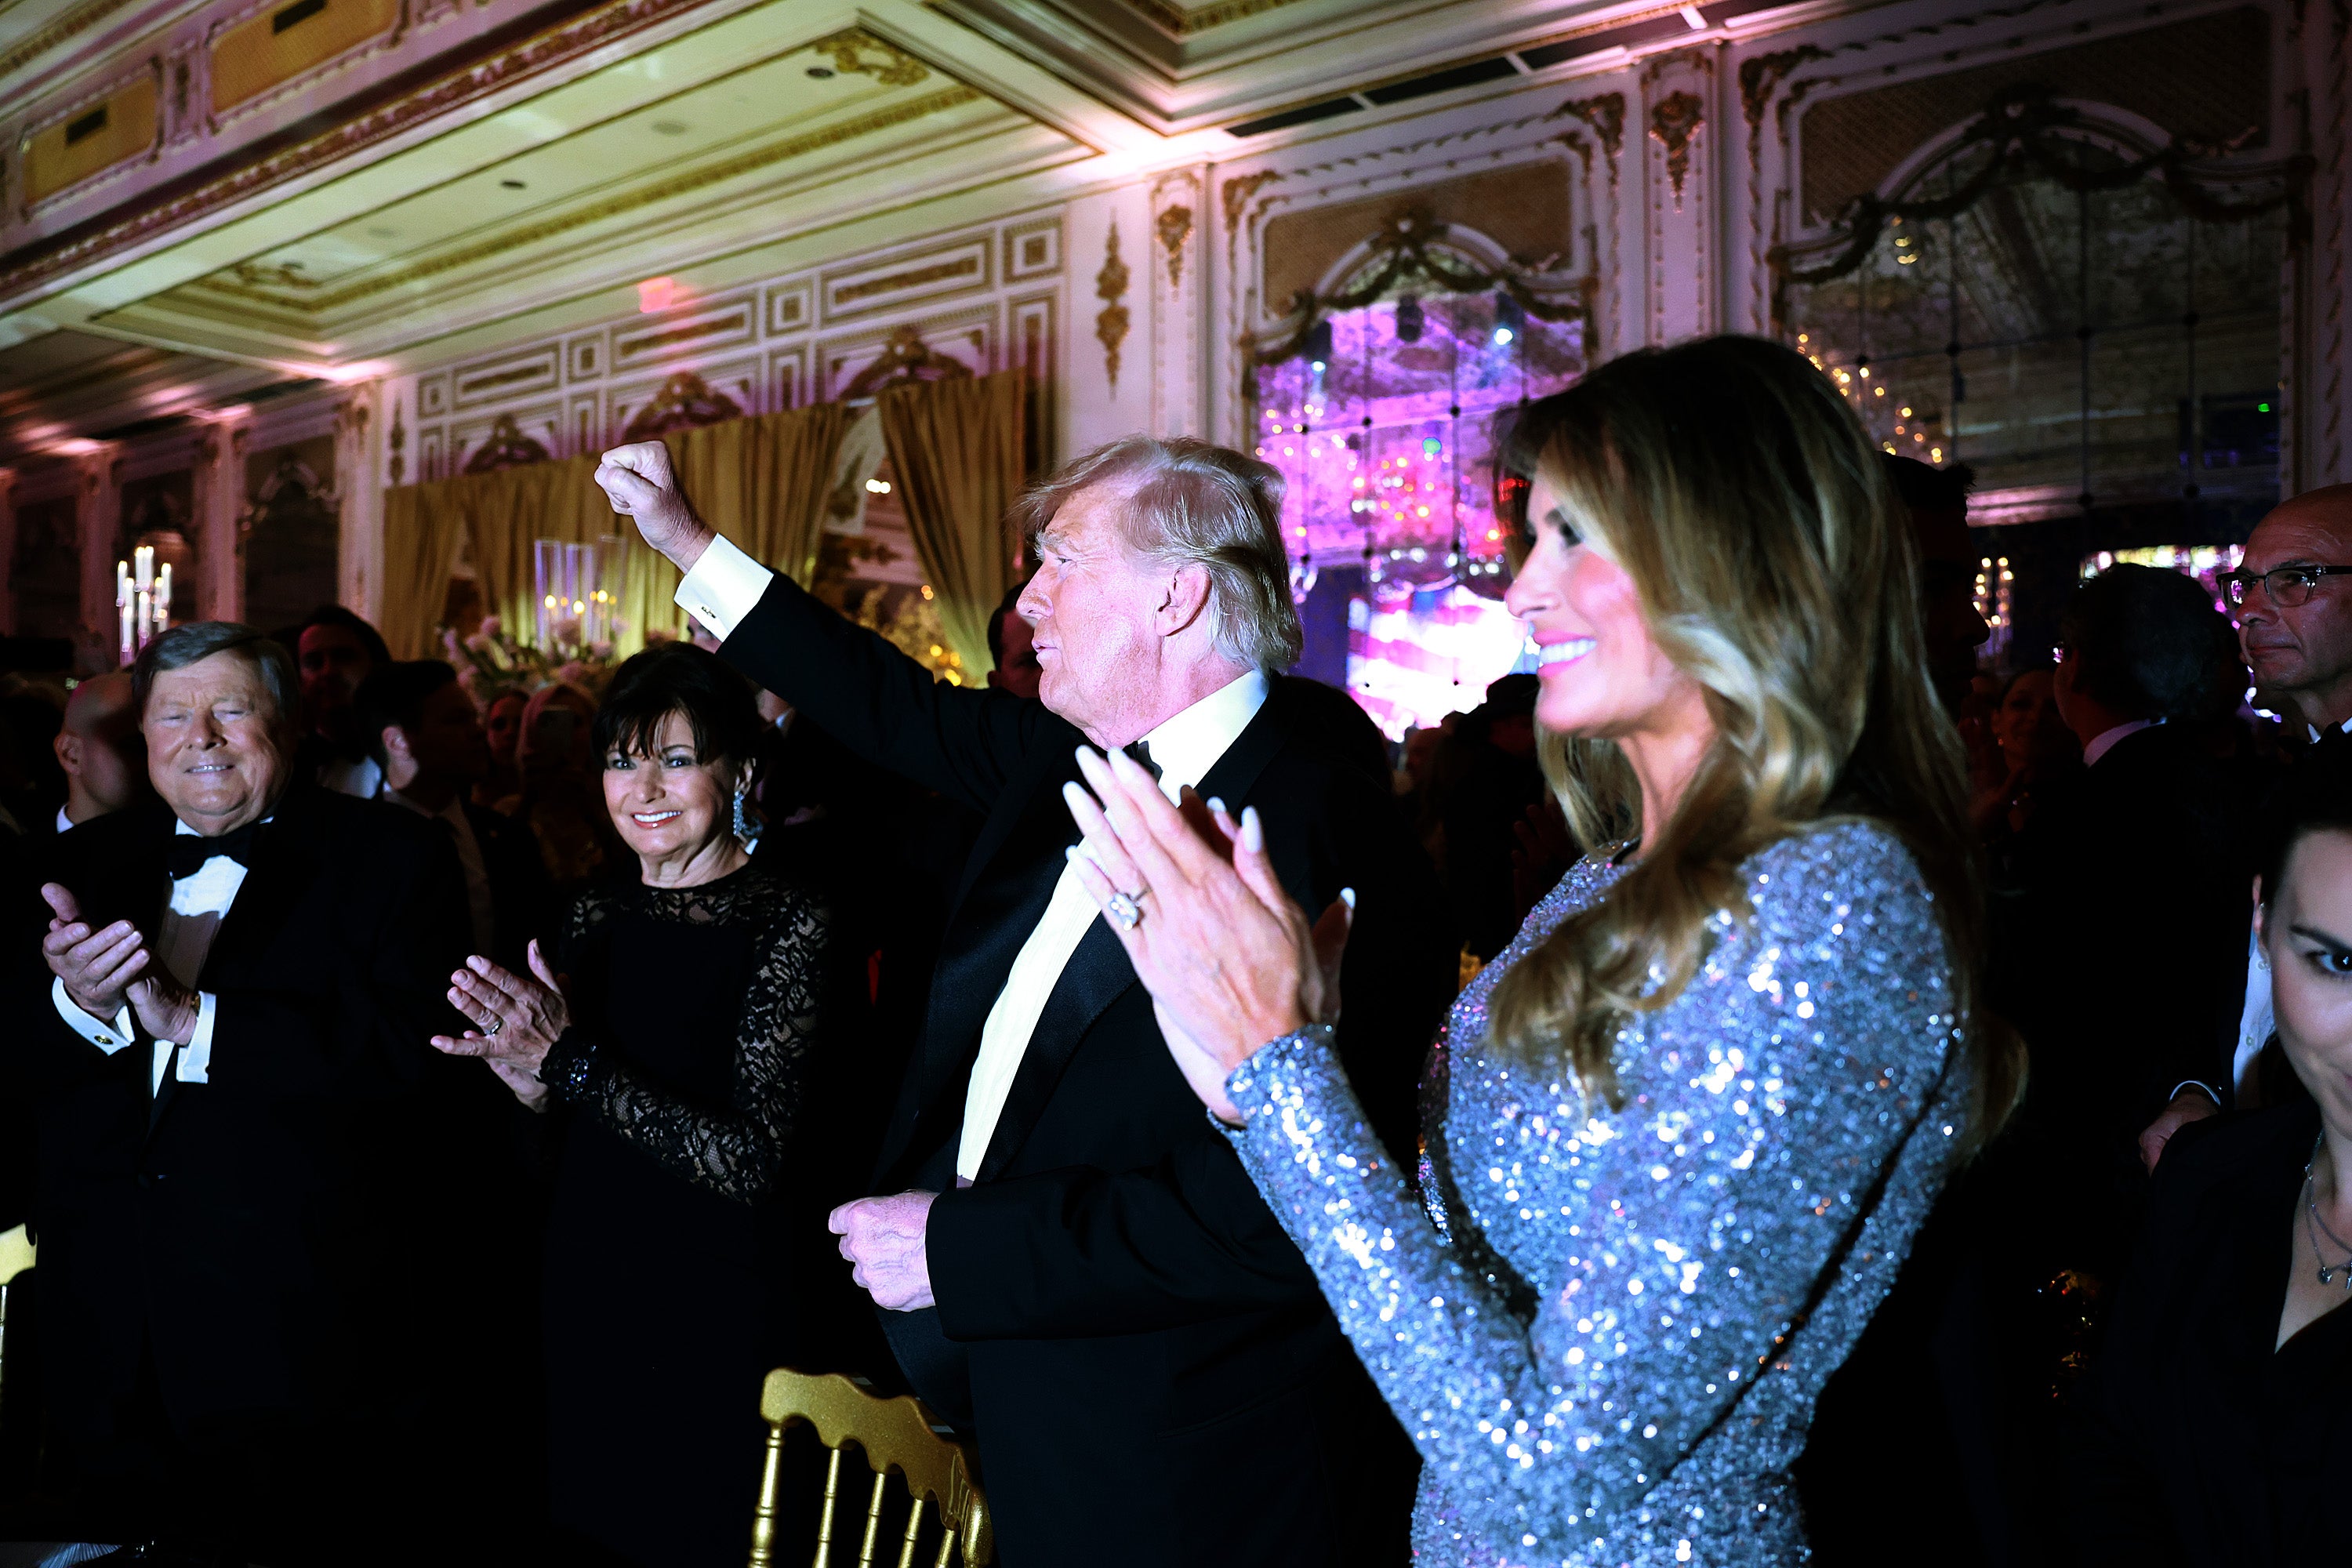 Ms Trump alongside husband former president Donald Trump at the Mar-a-Lago New Year’s Eve party 2022